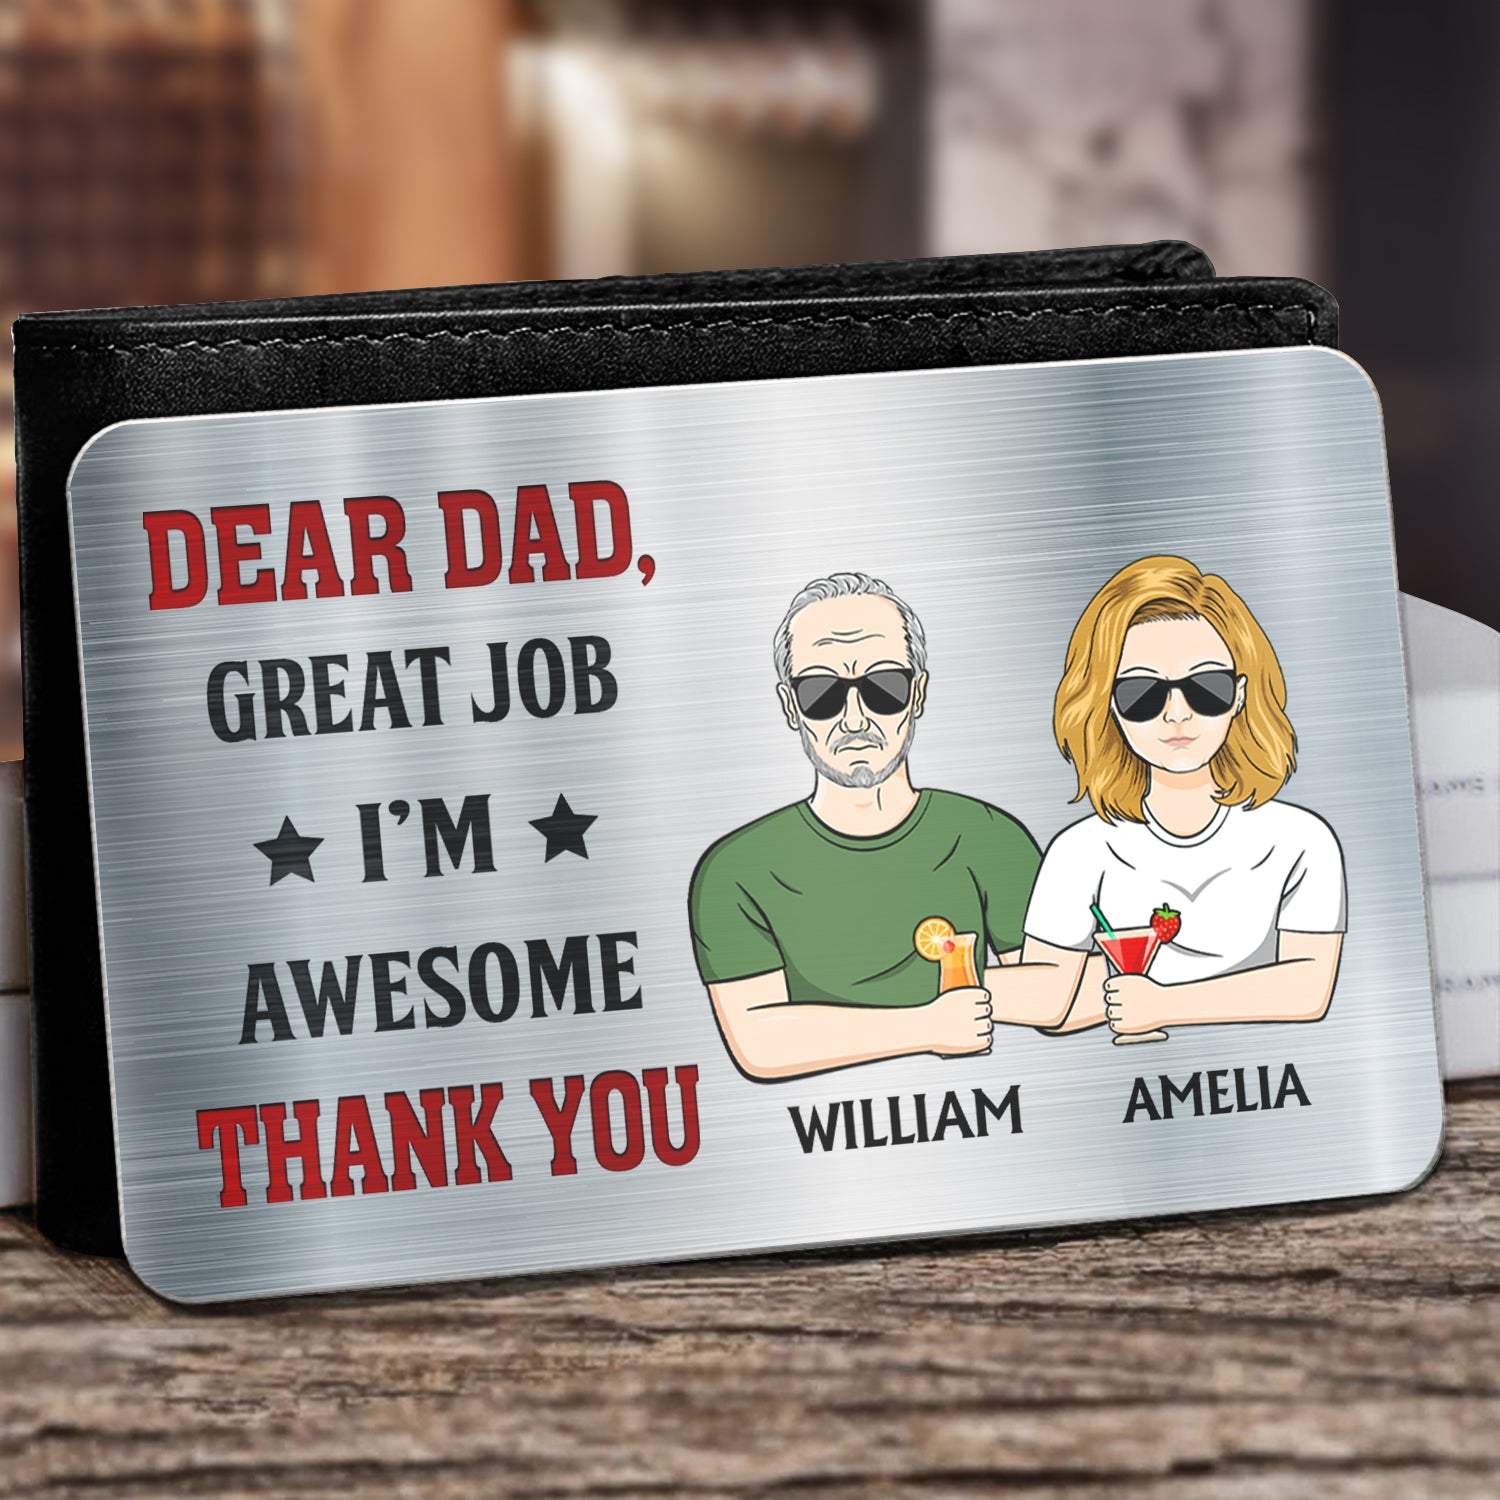 Great Job We're Awesome - Gift For Dad, Father, Grandpa - Personalized Aluminum Wallet Card